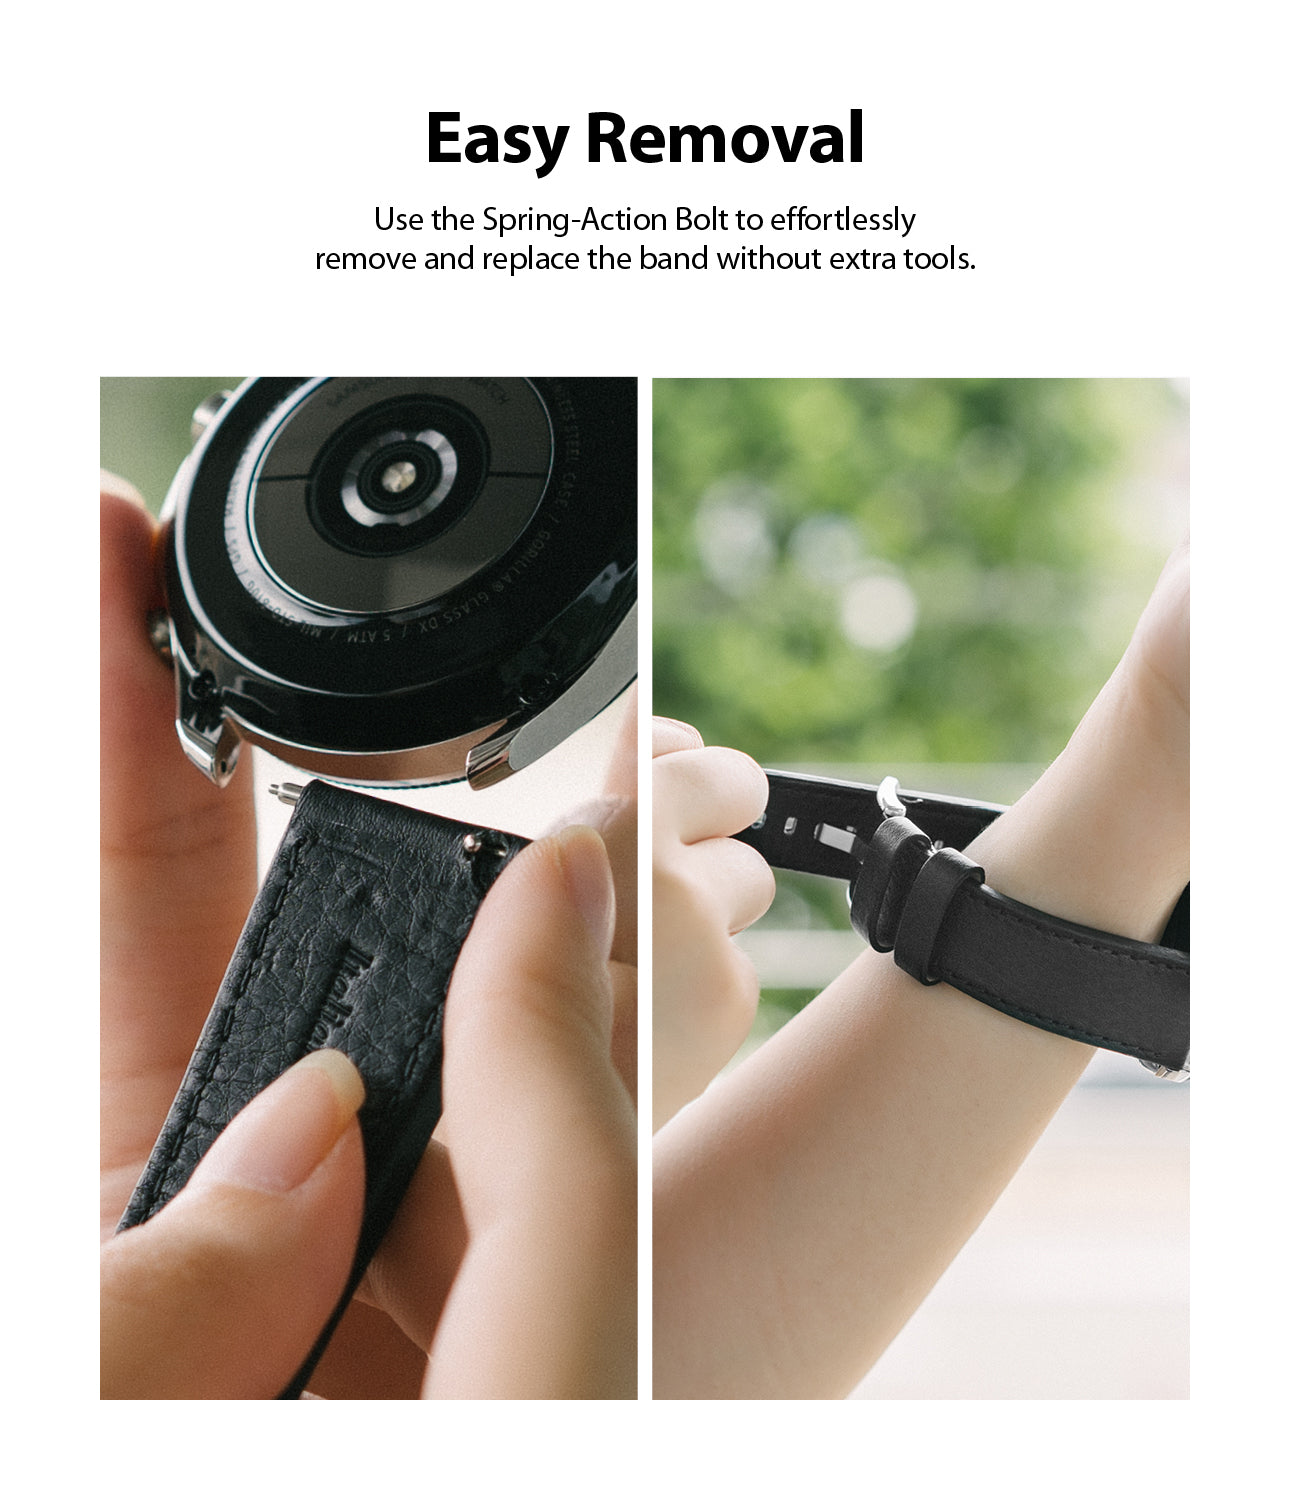 easy removal - use the spring action bolt to effortlessly remove and replace the band without extra tools